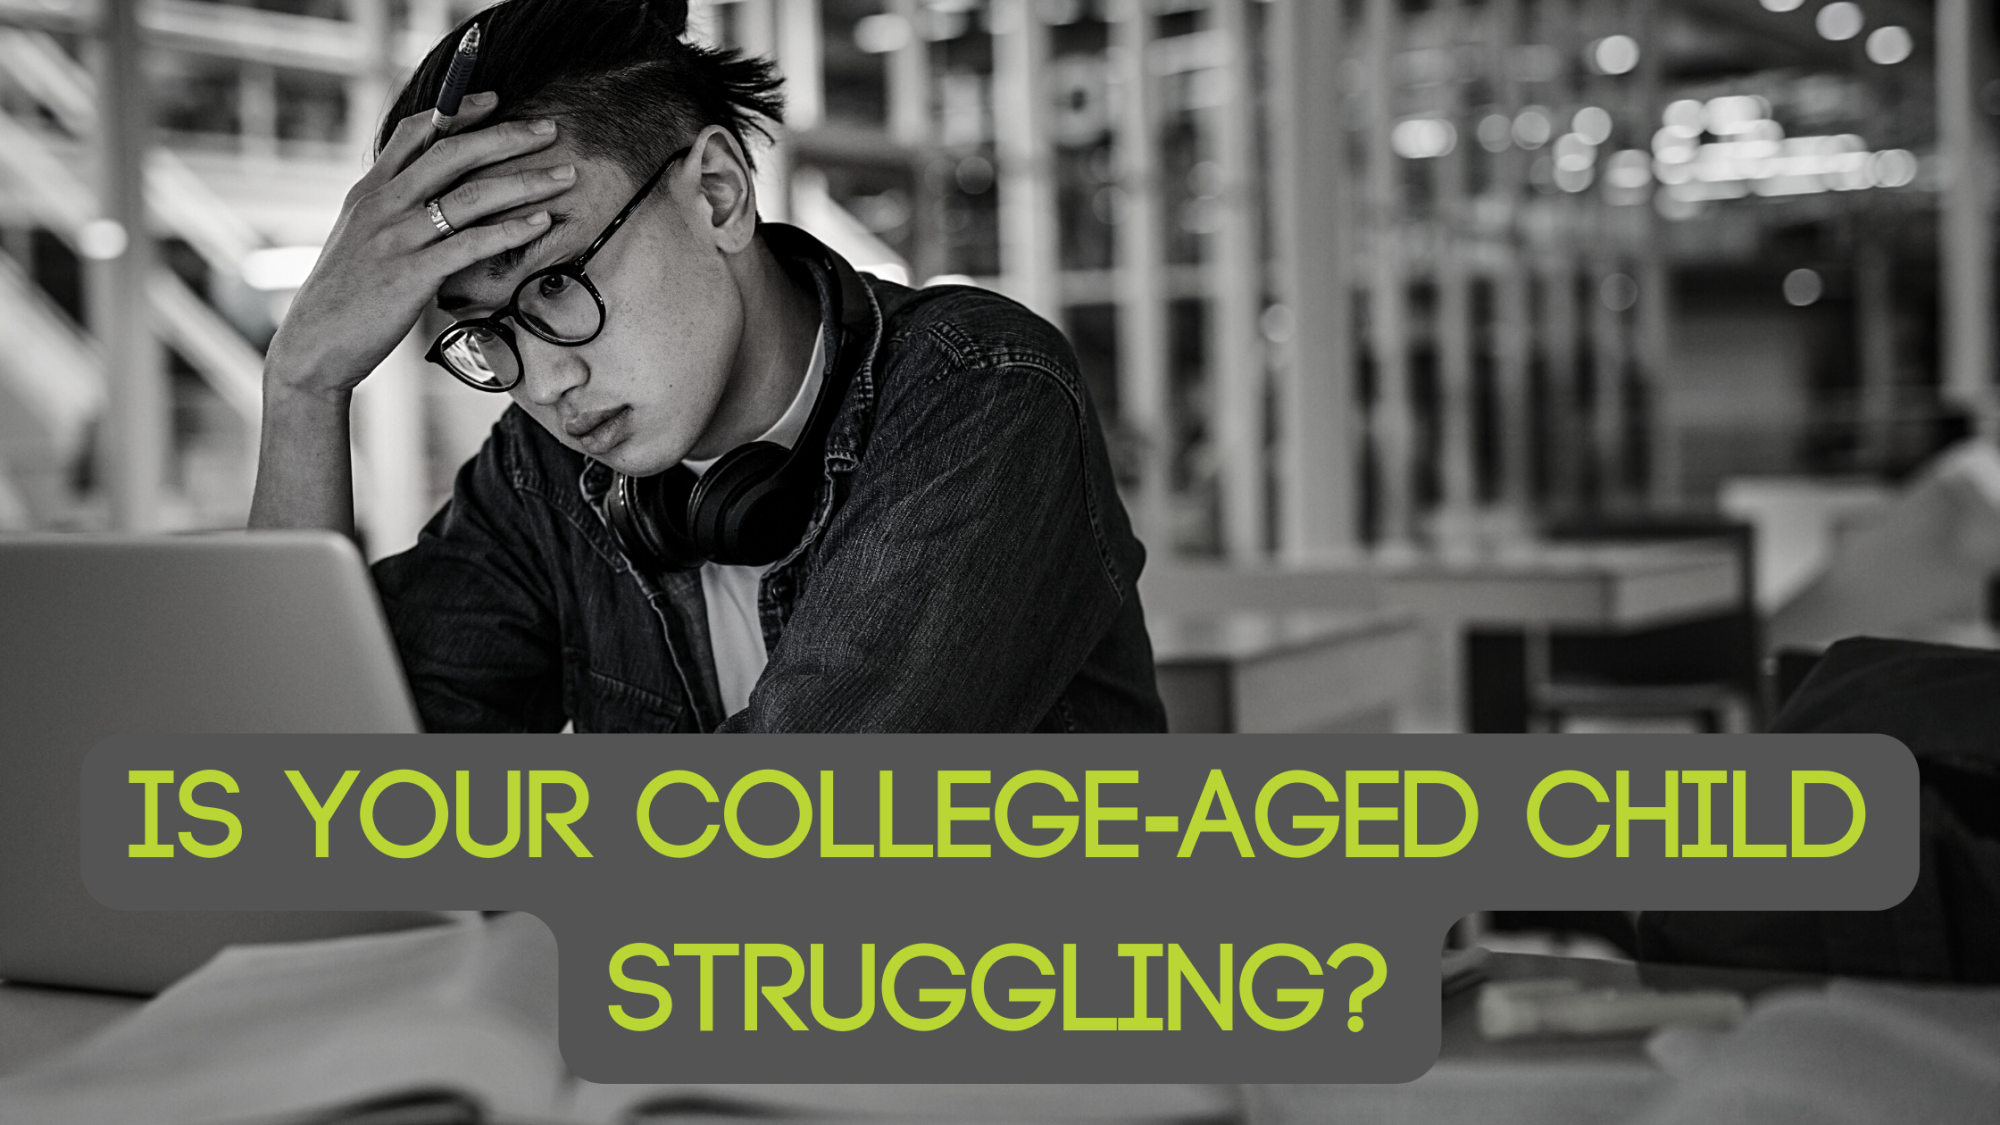 Person has their hand on their head, stressed, in a library looking at a computer. The image is black and white, and the green text states "Is your college=aged child struggling?"